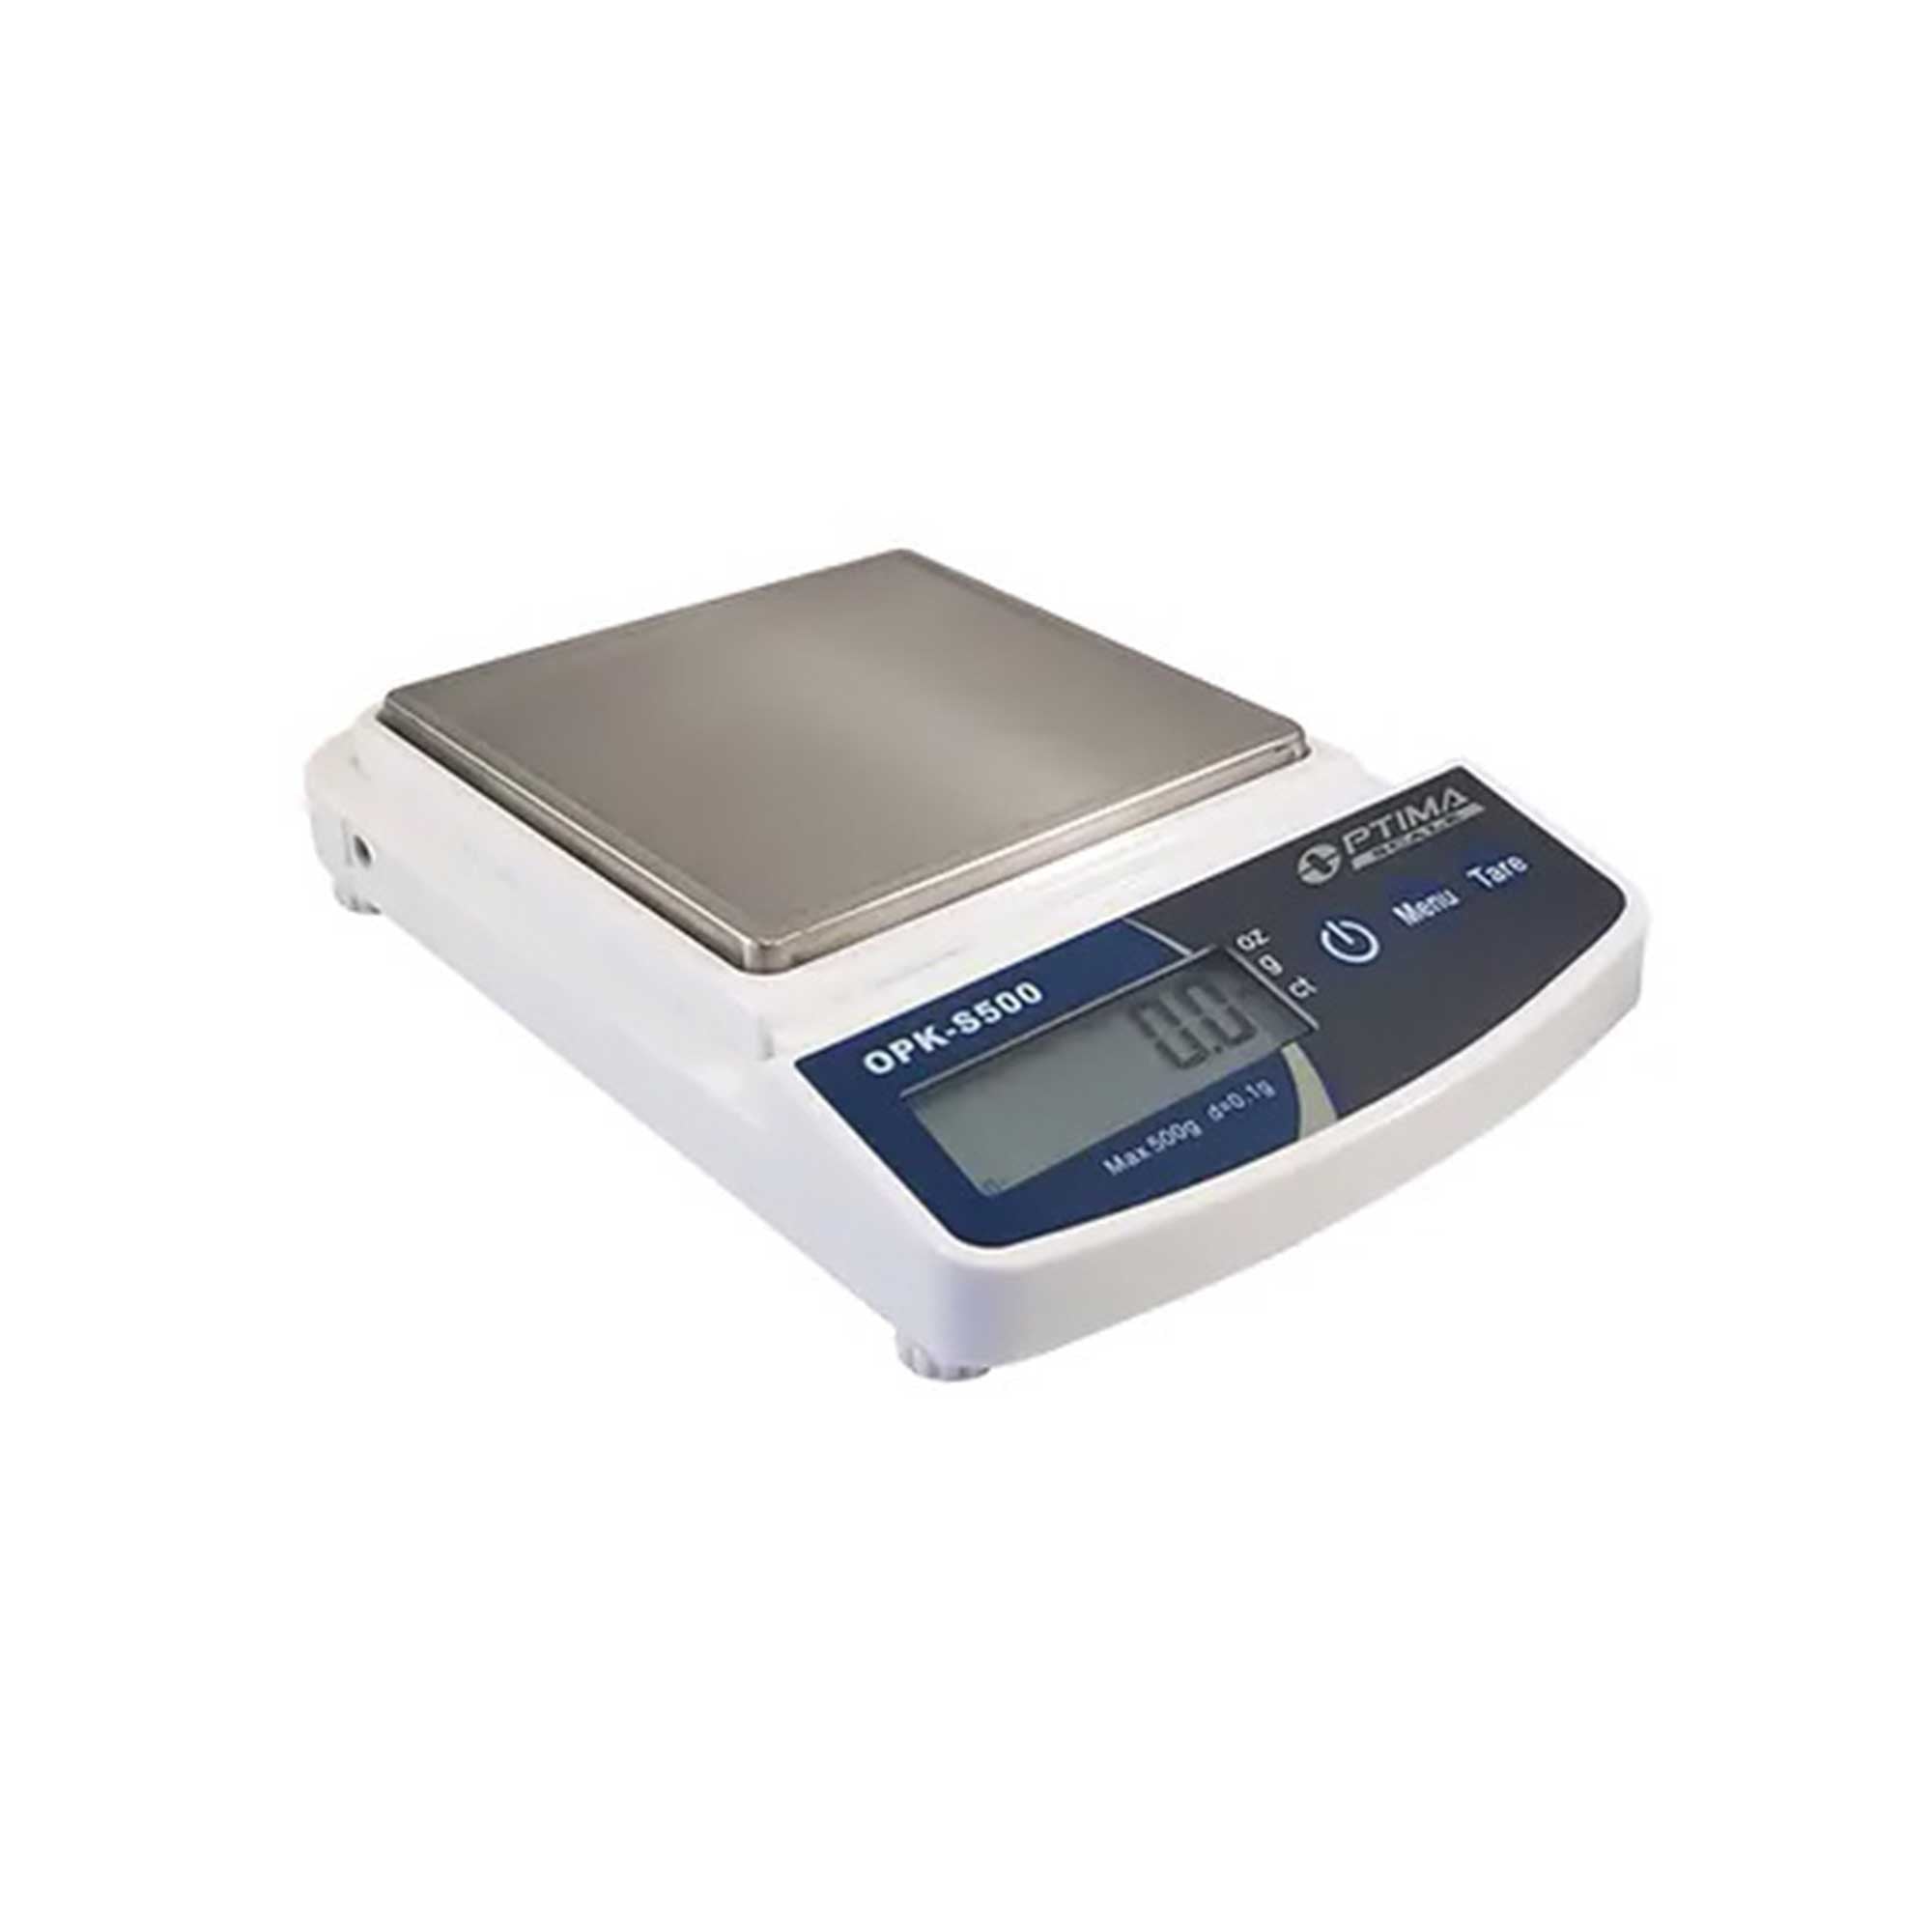 Smart Weigh Digital Shipping and Postal Weight Scale, 110 pounds x